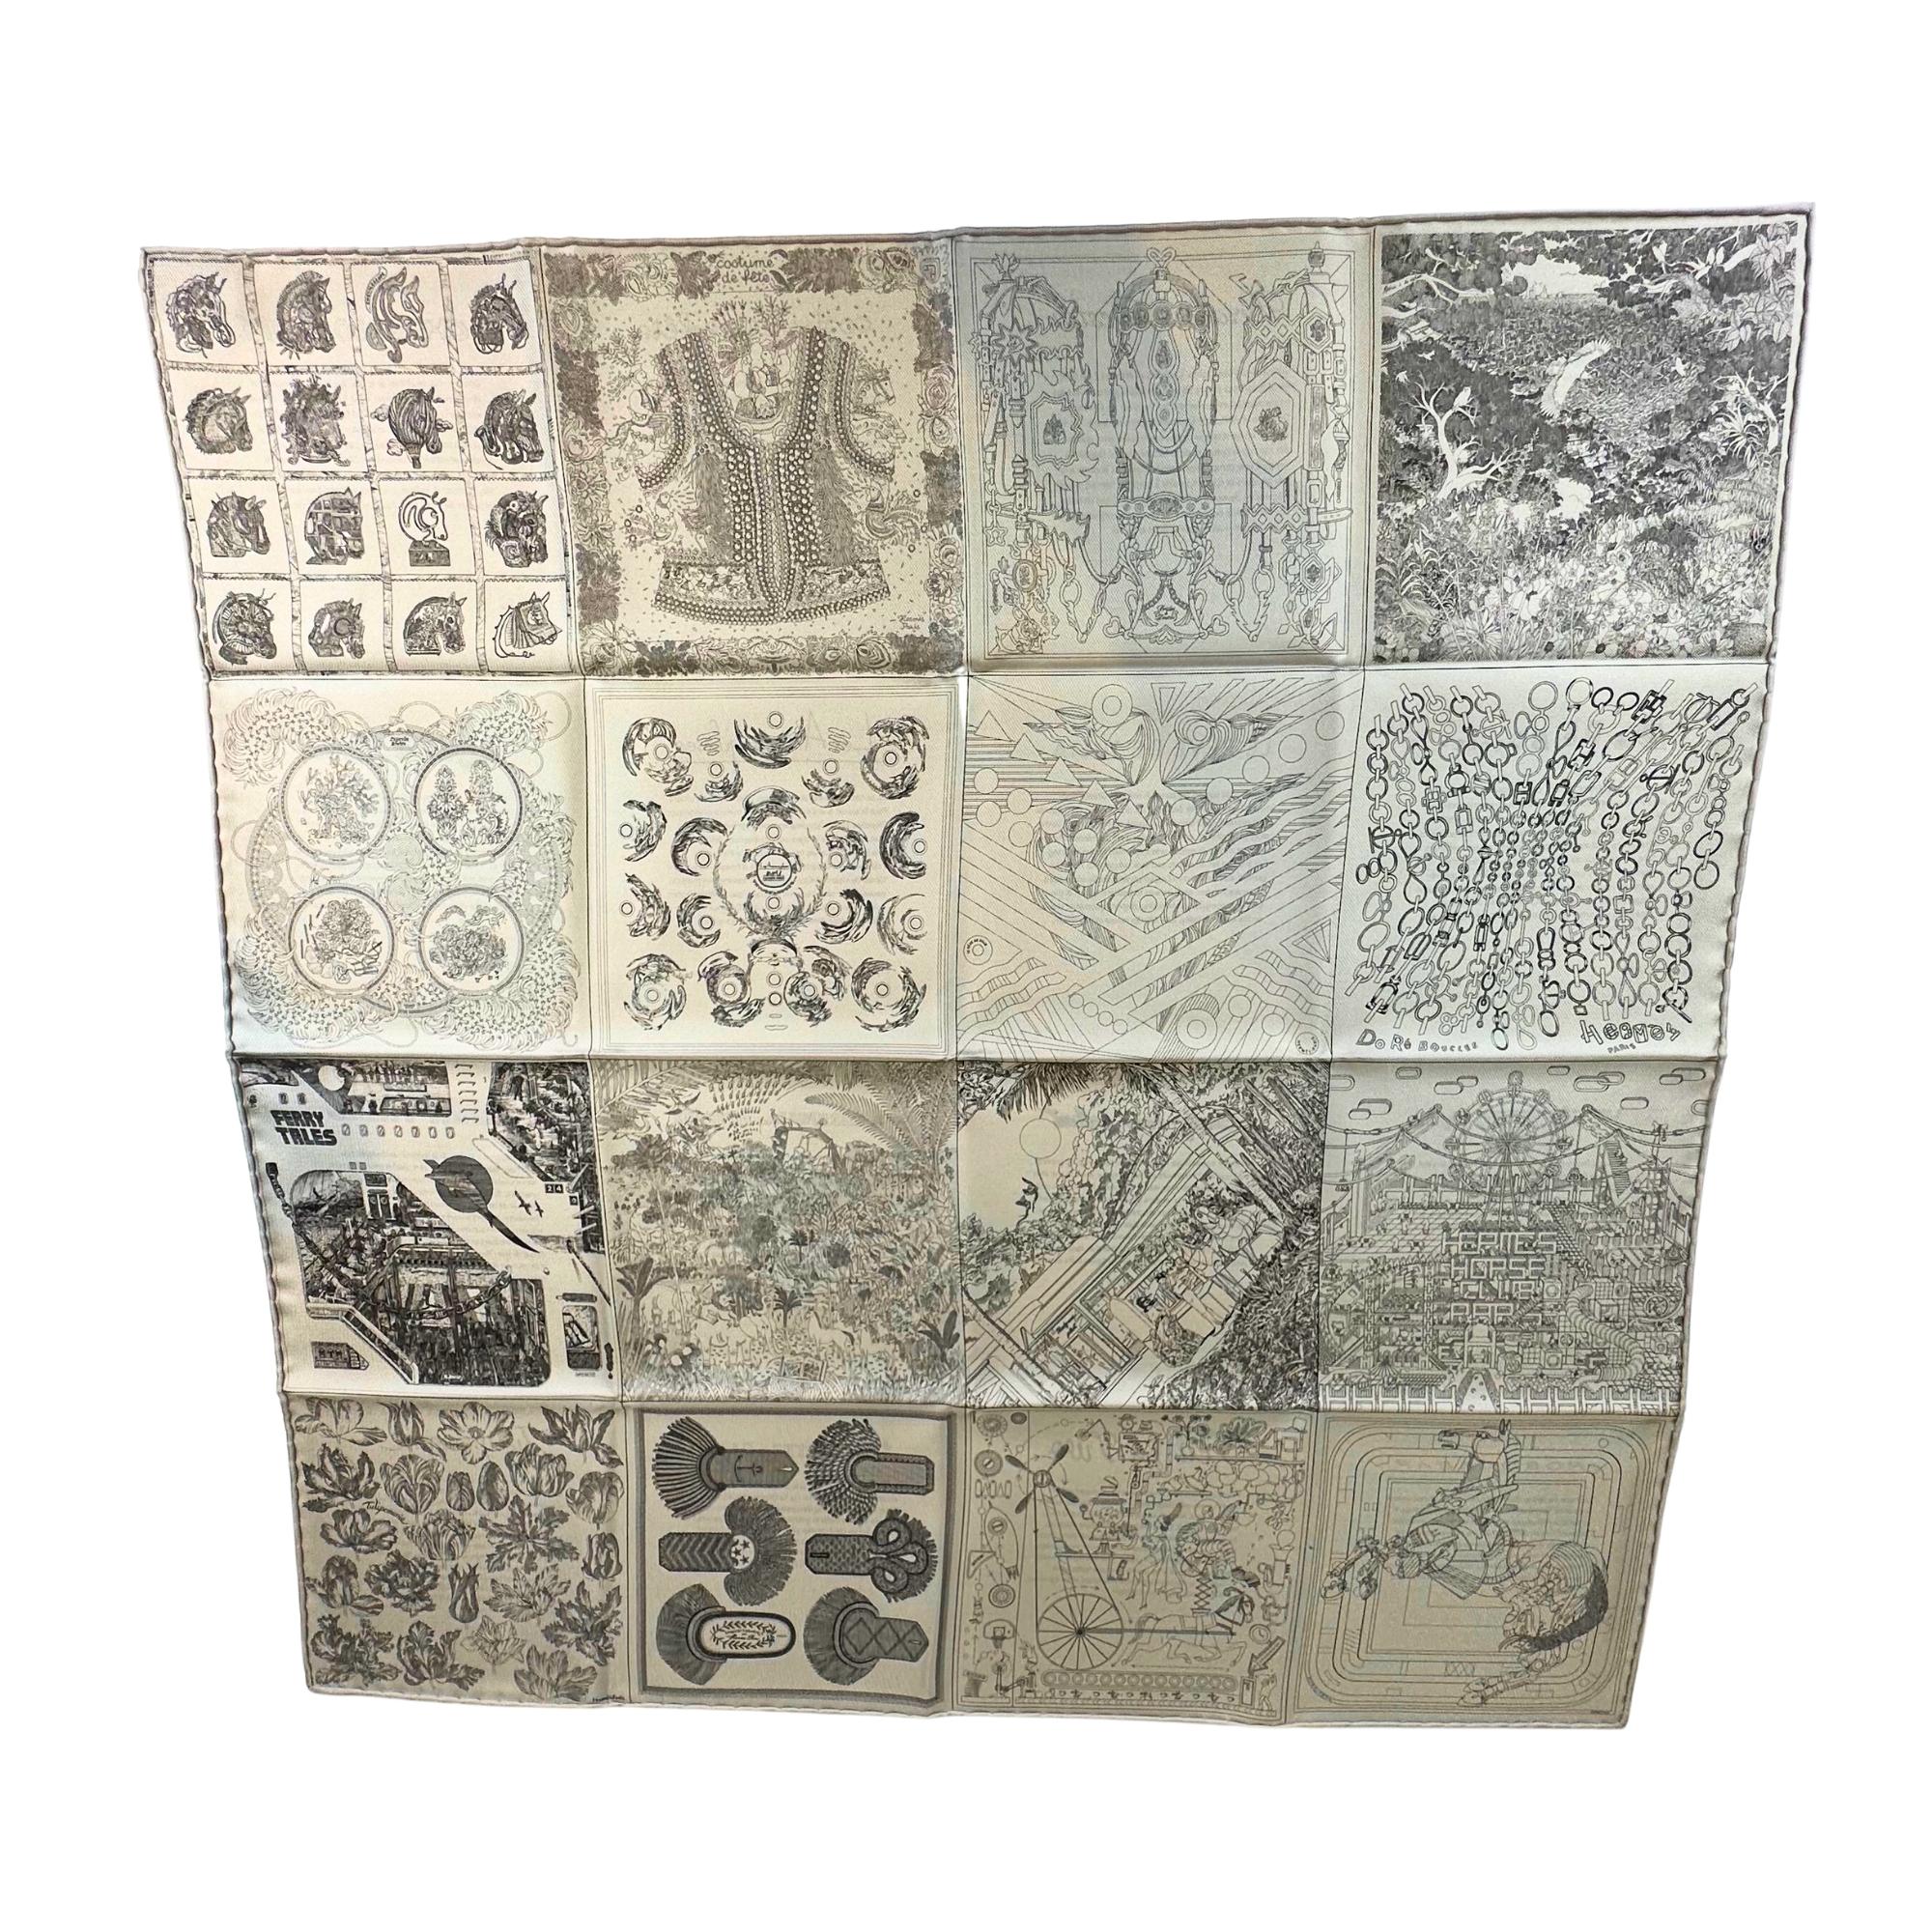 2023 season. Showing the 16 scarves pattern and description. Double sided. 60cm * 60cm. Very rare. Collector's item. In box and ribbon. 

Color: Black and white
Material: Silk
Year: 2023
Measures: 60 x 60-cm (23x23-inch)
Comes with: Box
Condition: